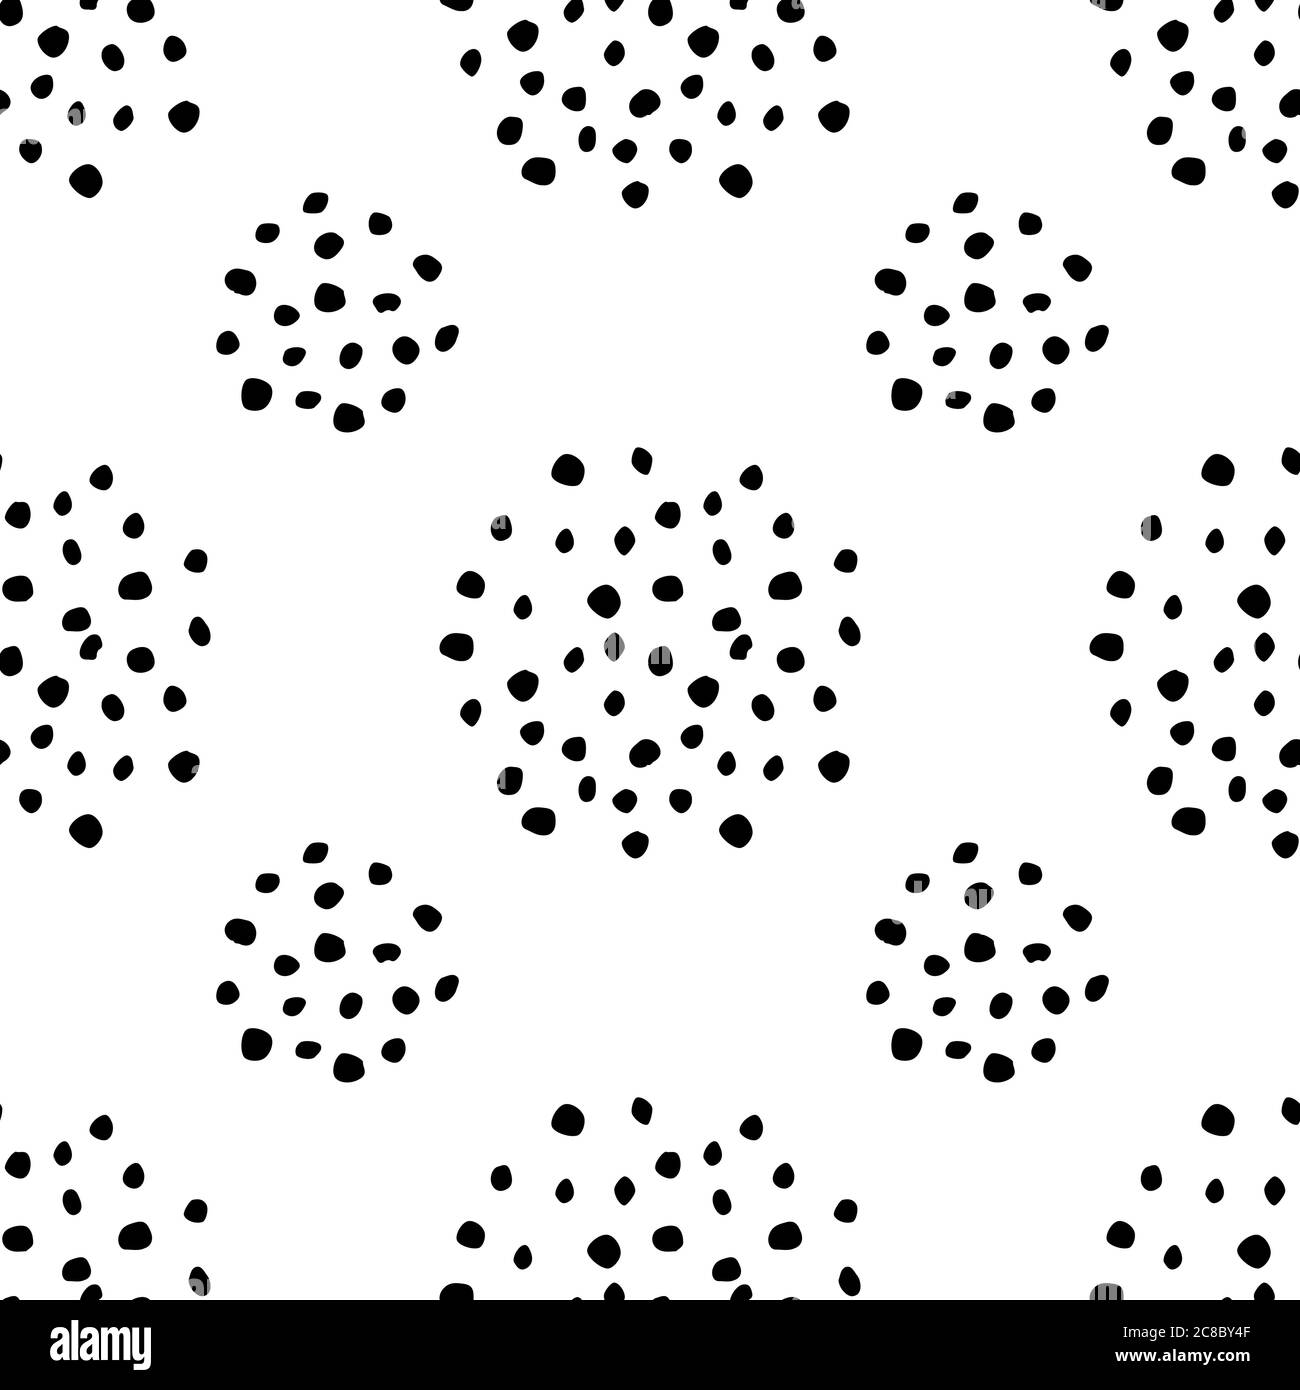 Doodle Dots Seamless Pattern. Sketchy Hand Drawn graphic print. Black and white dotted background. Grungy painted ornament. Vector illustration. Stock Vector